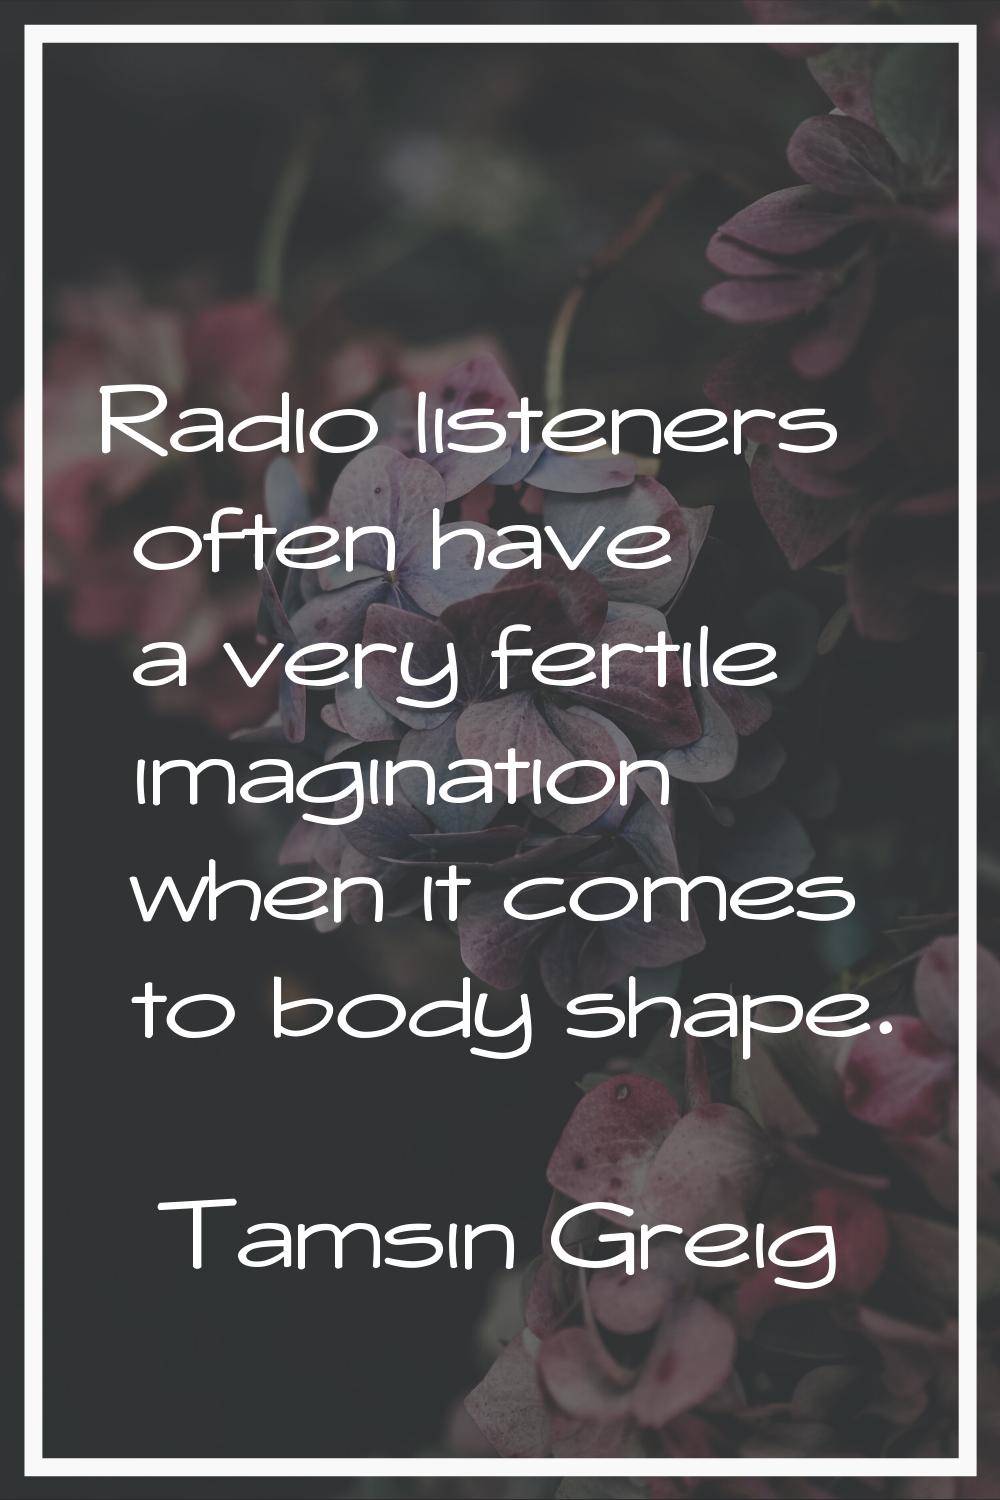 Radio listeners often have a very fertile imagination when it comes to body shape.